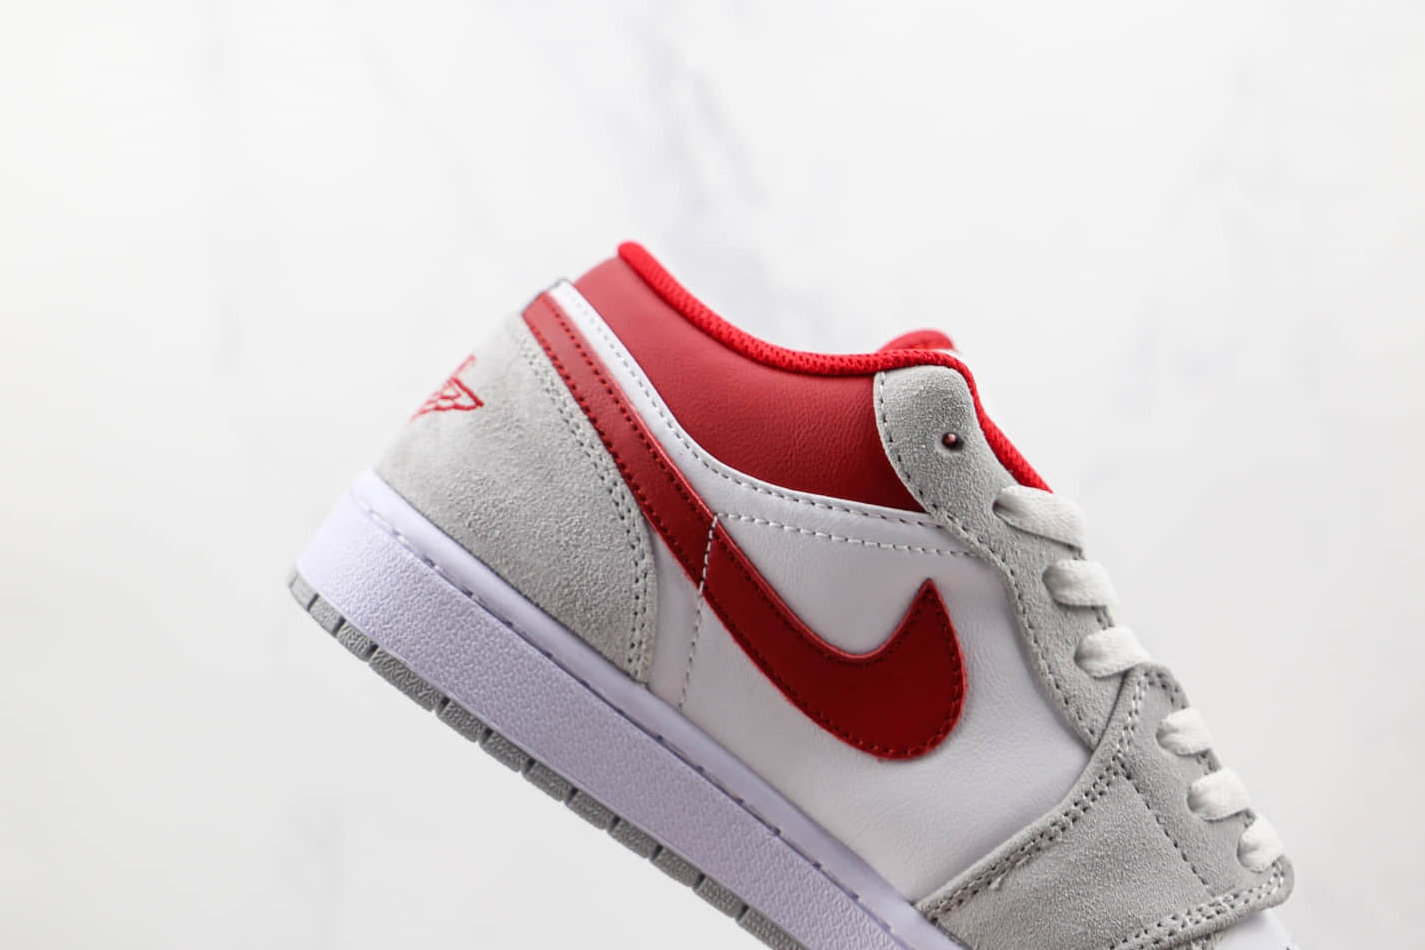 Air Jordan 1 Low SE 'Light Smoke Grey Gym Red' DC6991-016 - Stylish and Iconic Sneakers